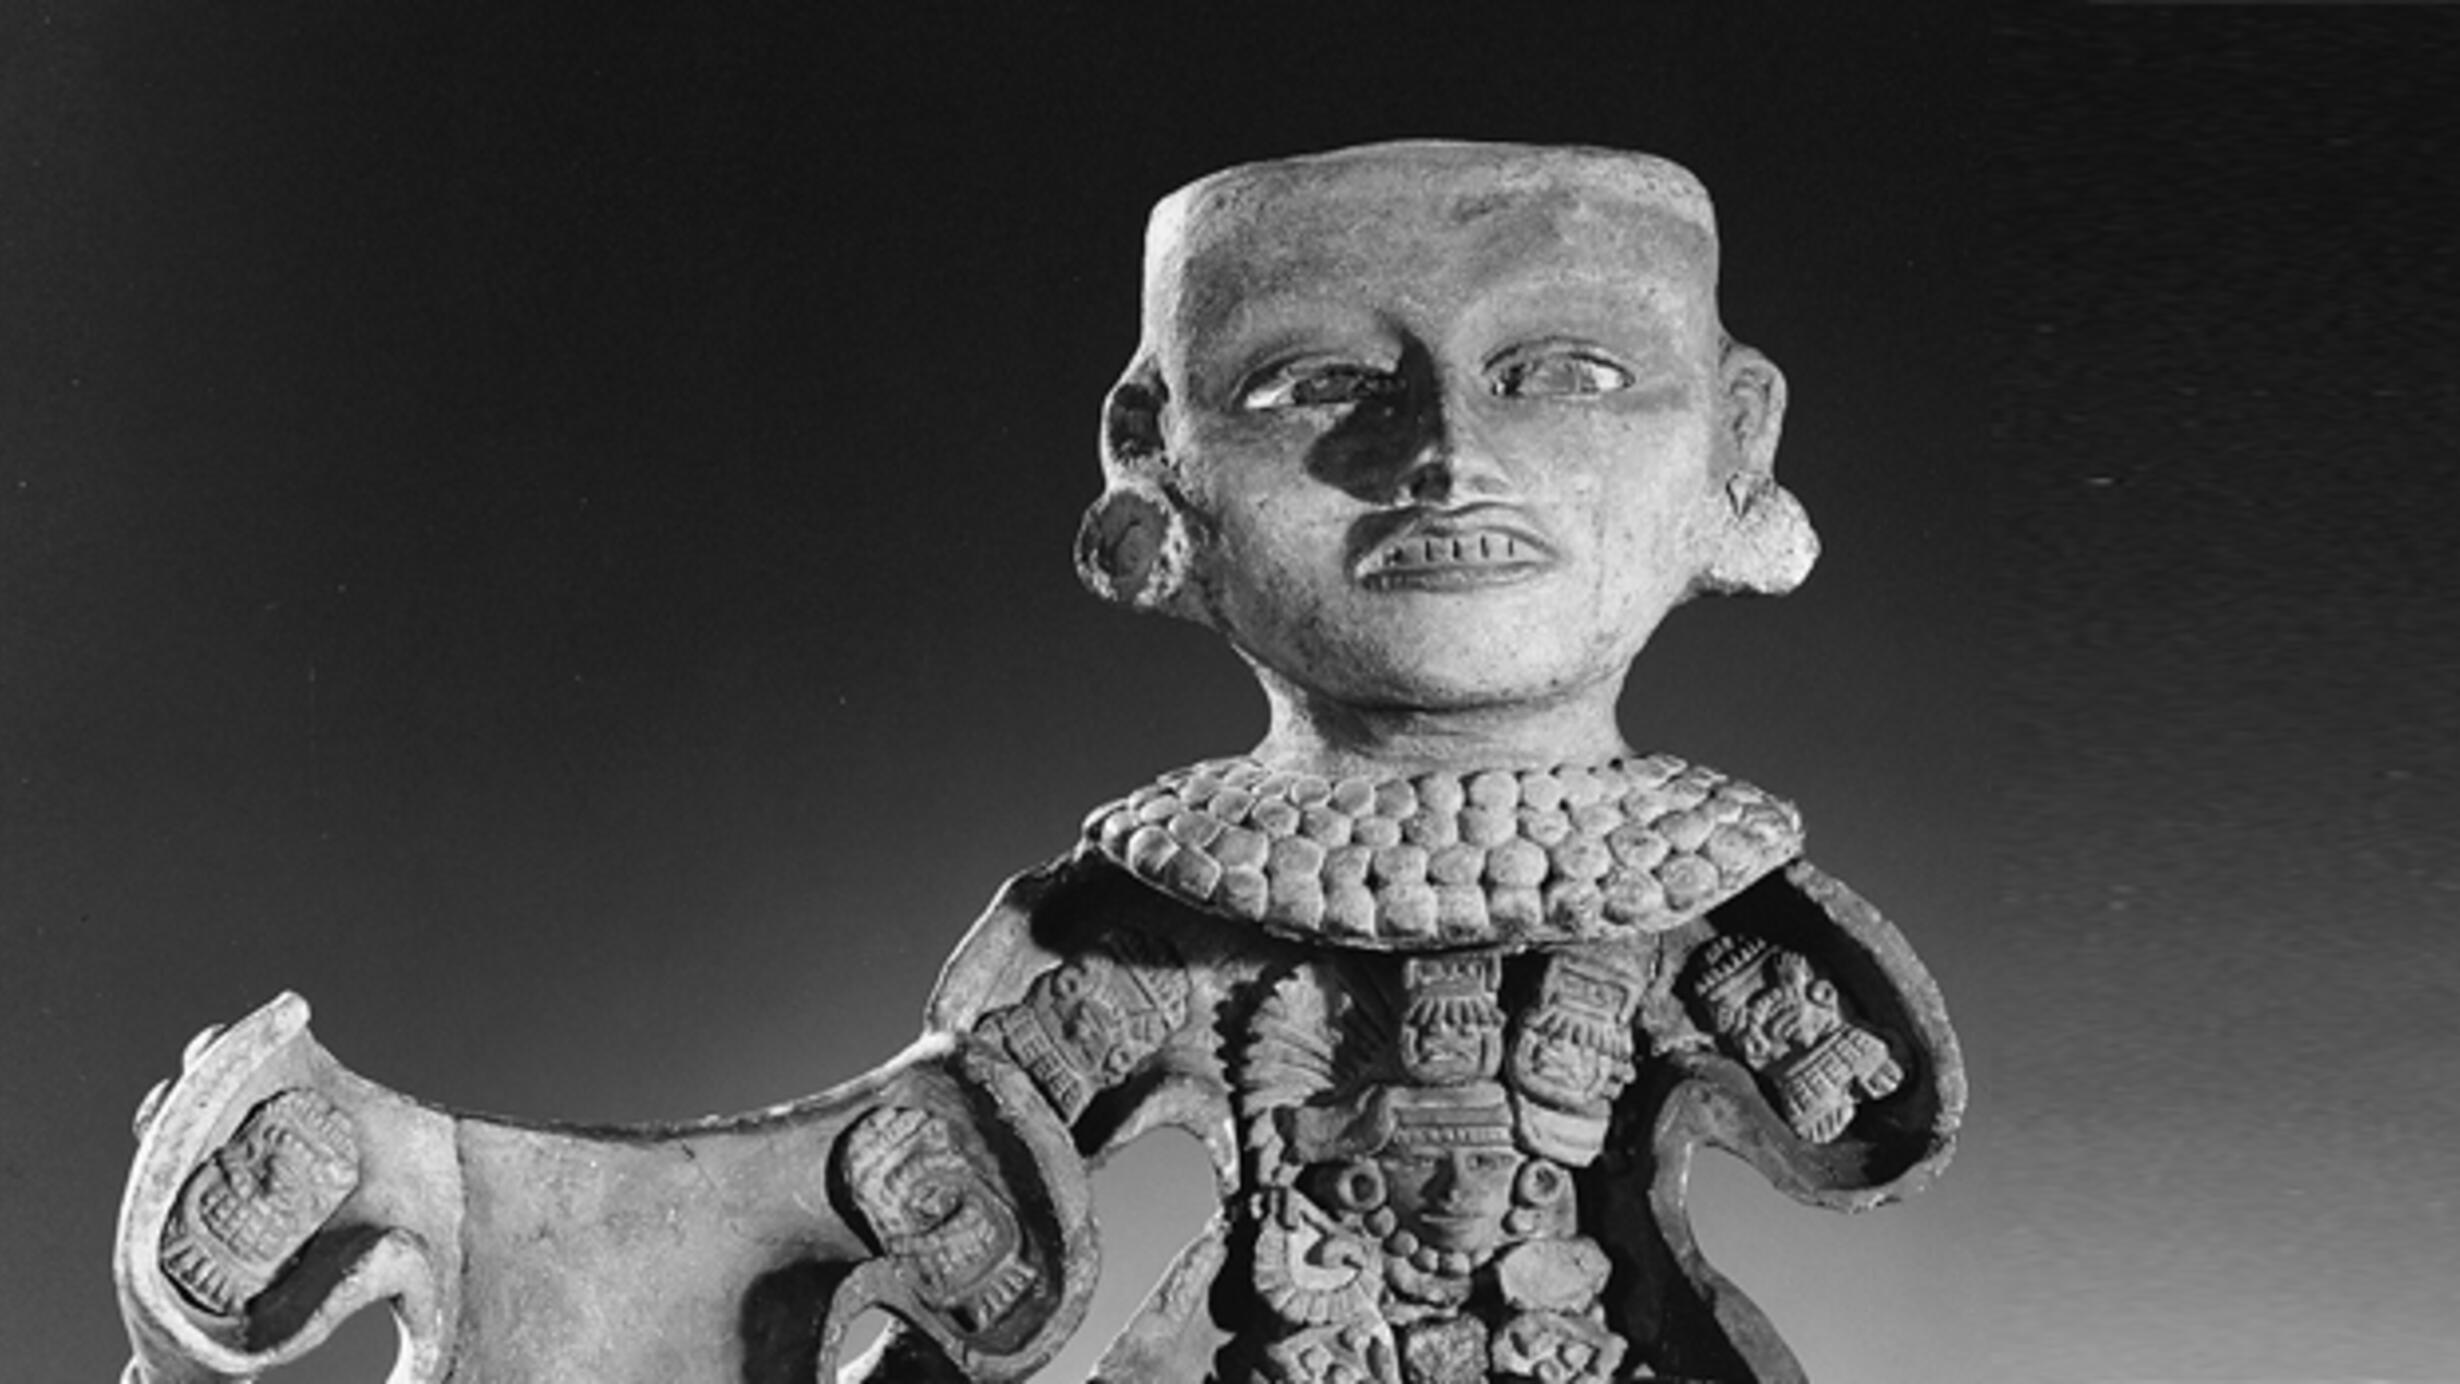 An elaborately carved figure of a human, from the Museum's Hall of Mexico and Central America.